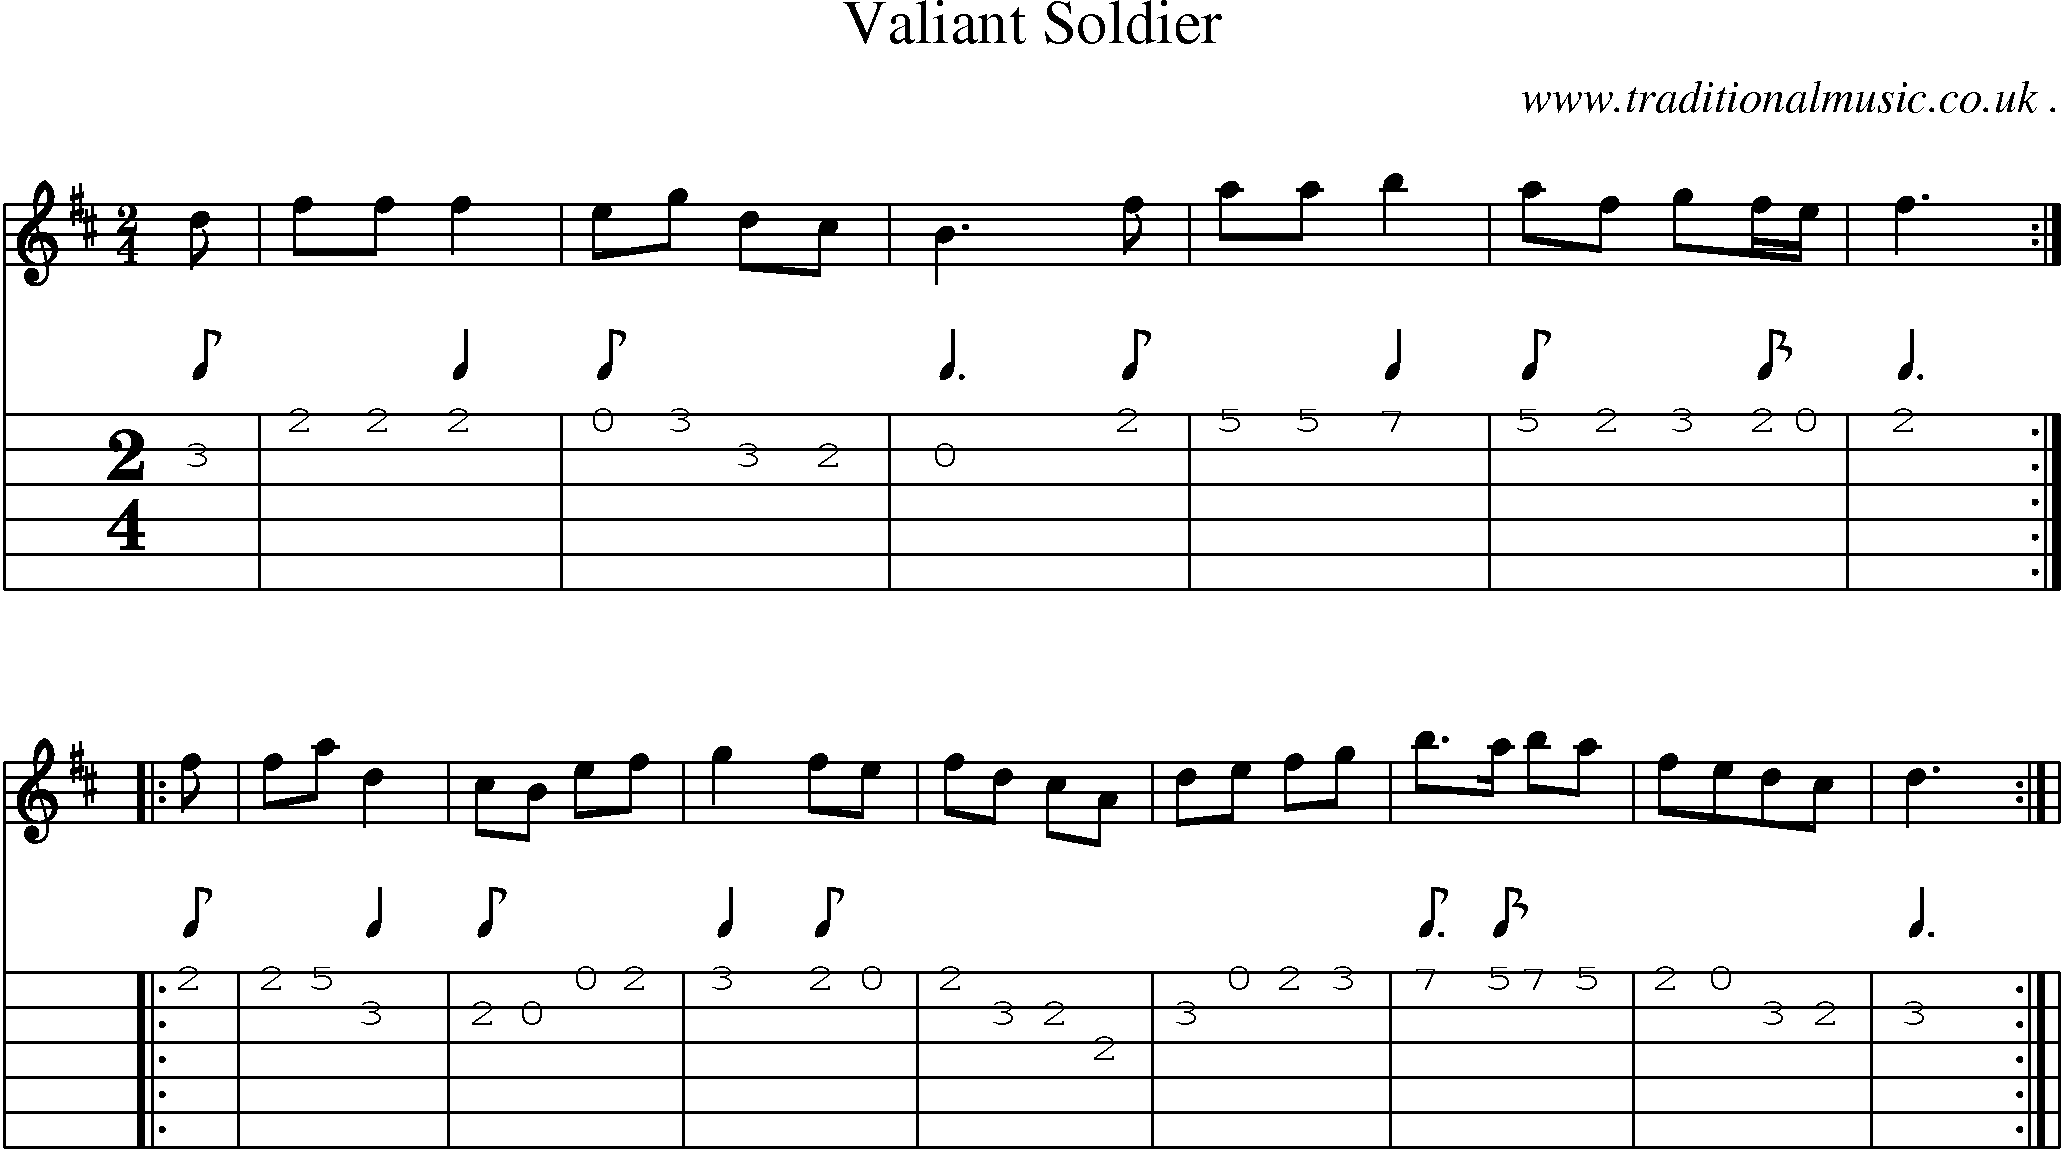 Sheet-Music and Guitar Tabs for Valiant Soldier